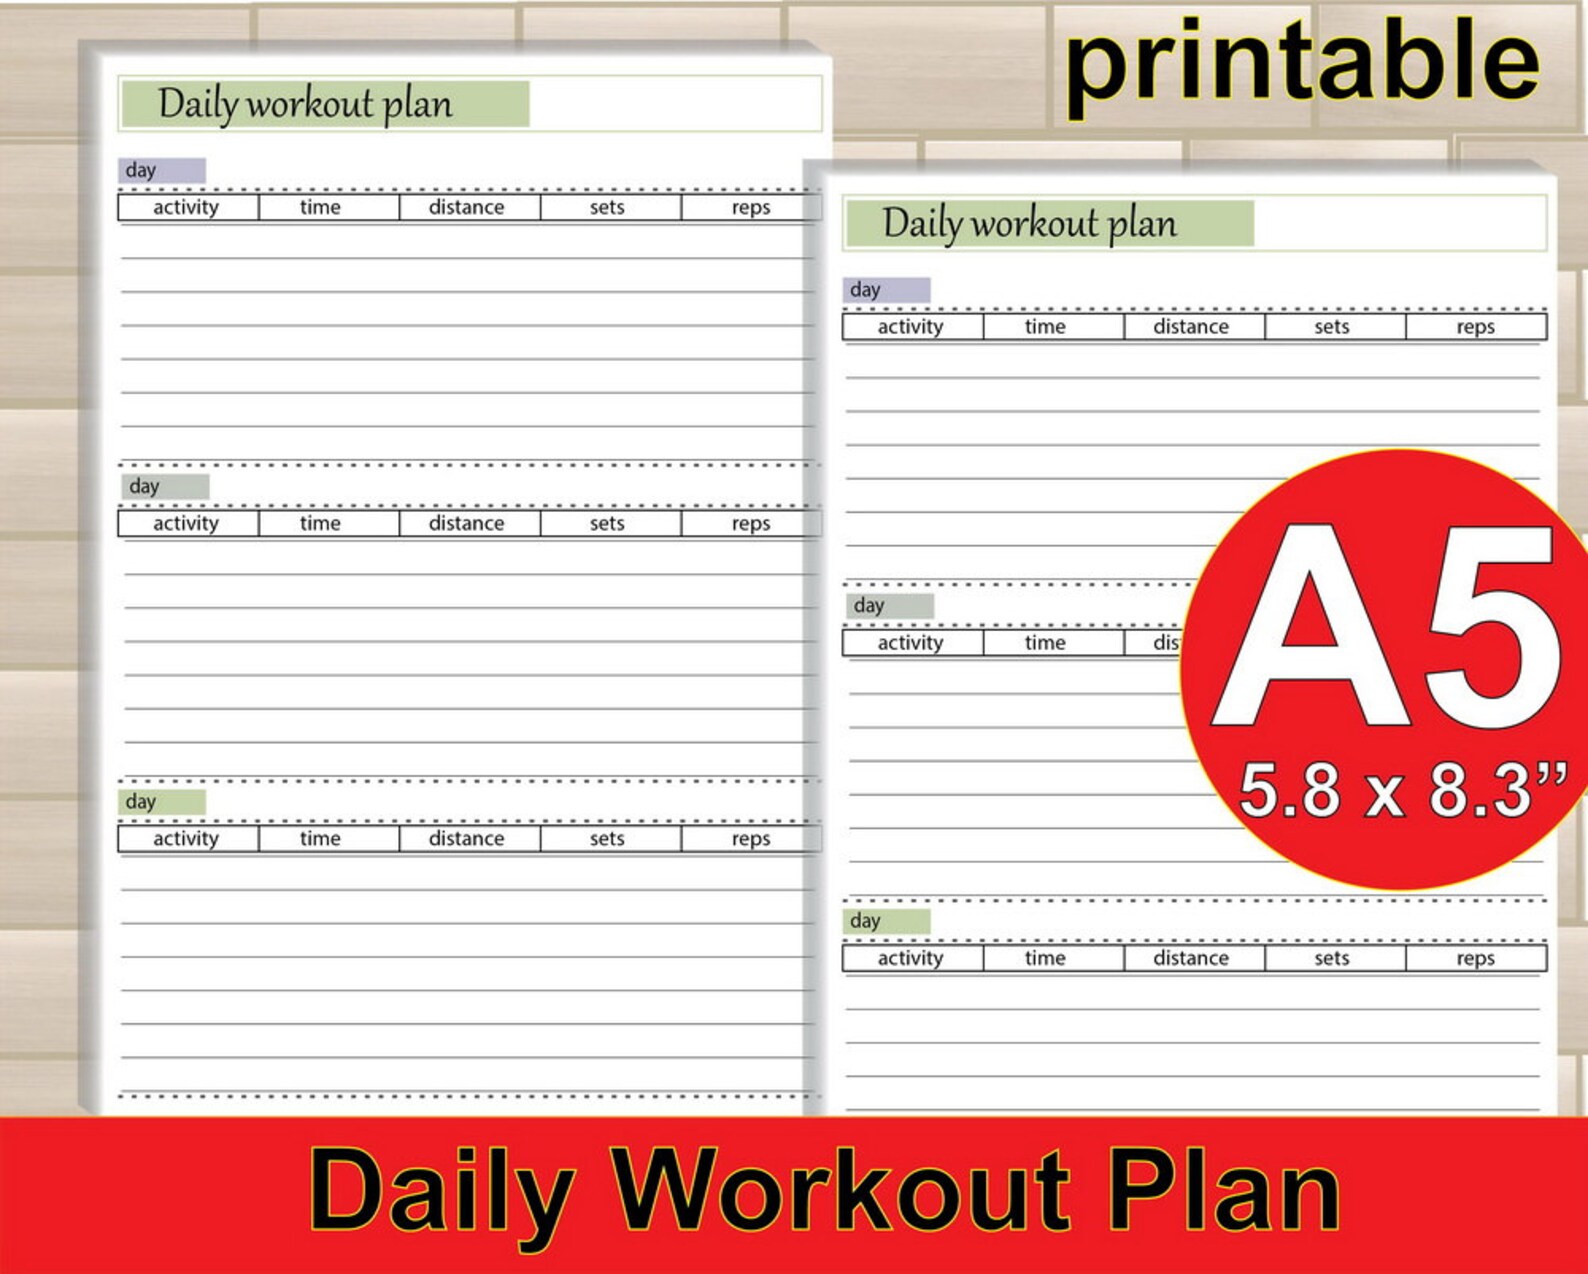 T me daily logs. Workout Planner Daily.